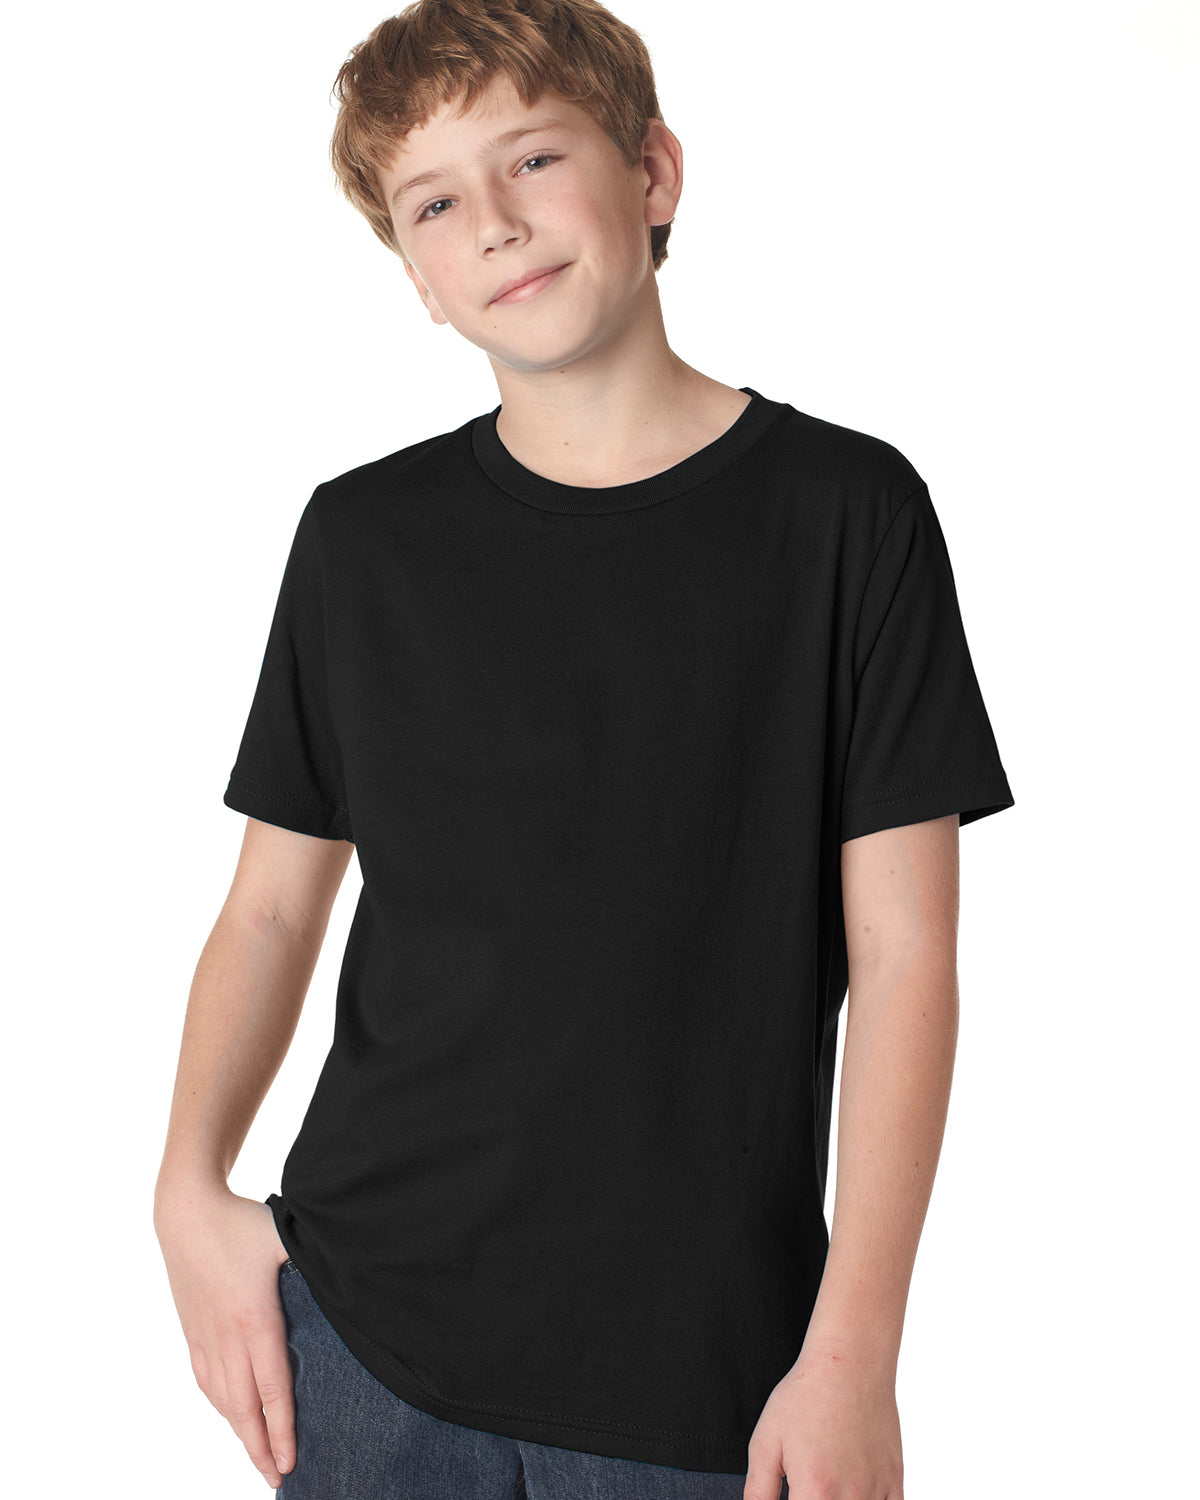 child model wearing next level youth tee in black